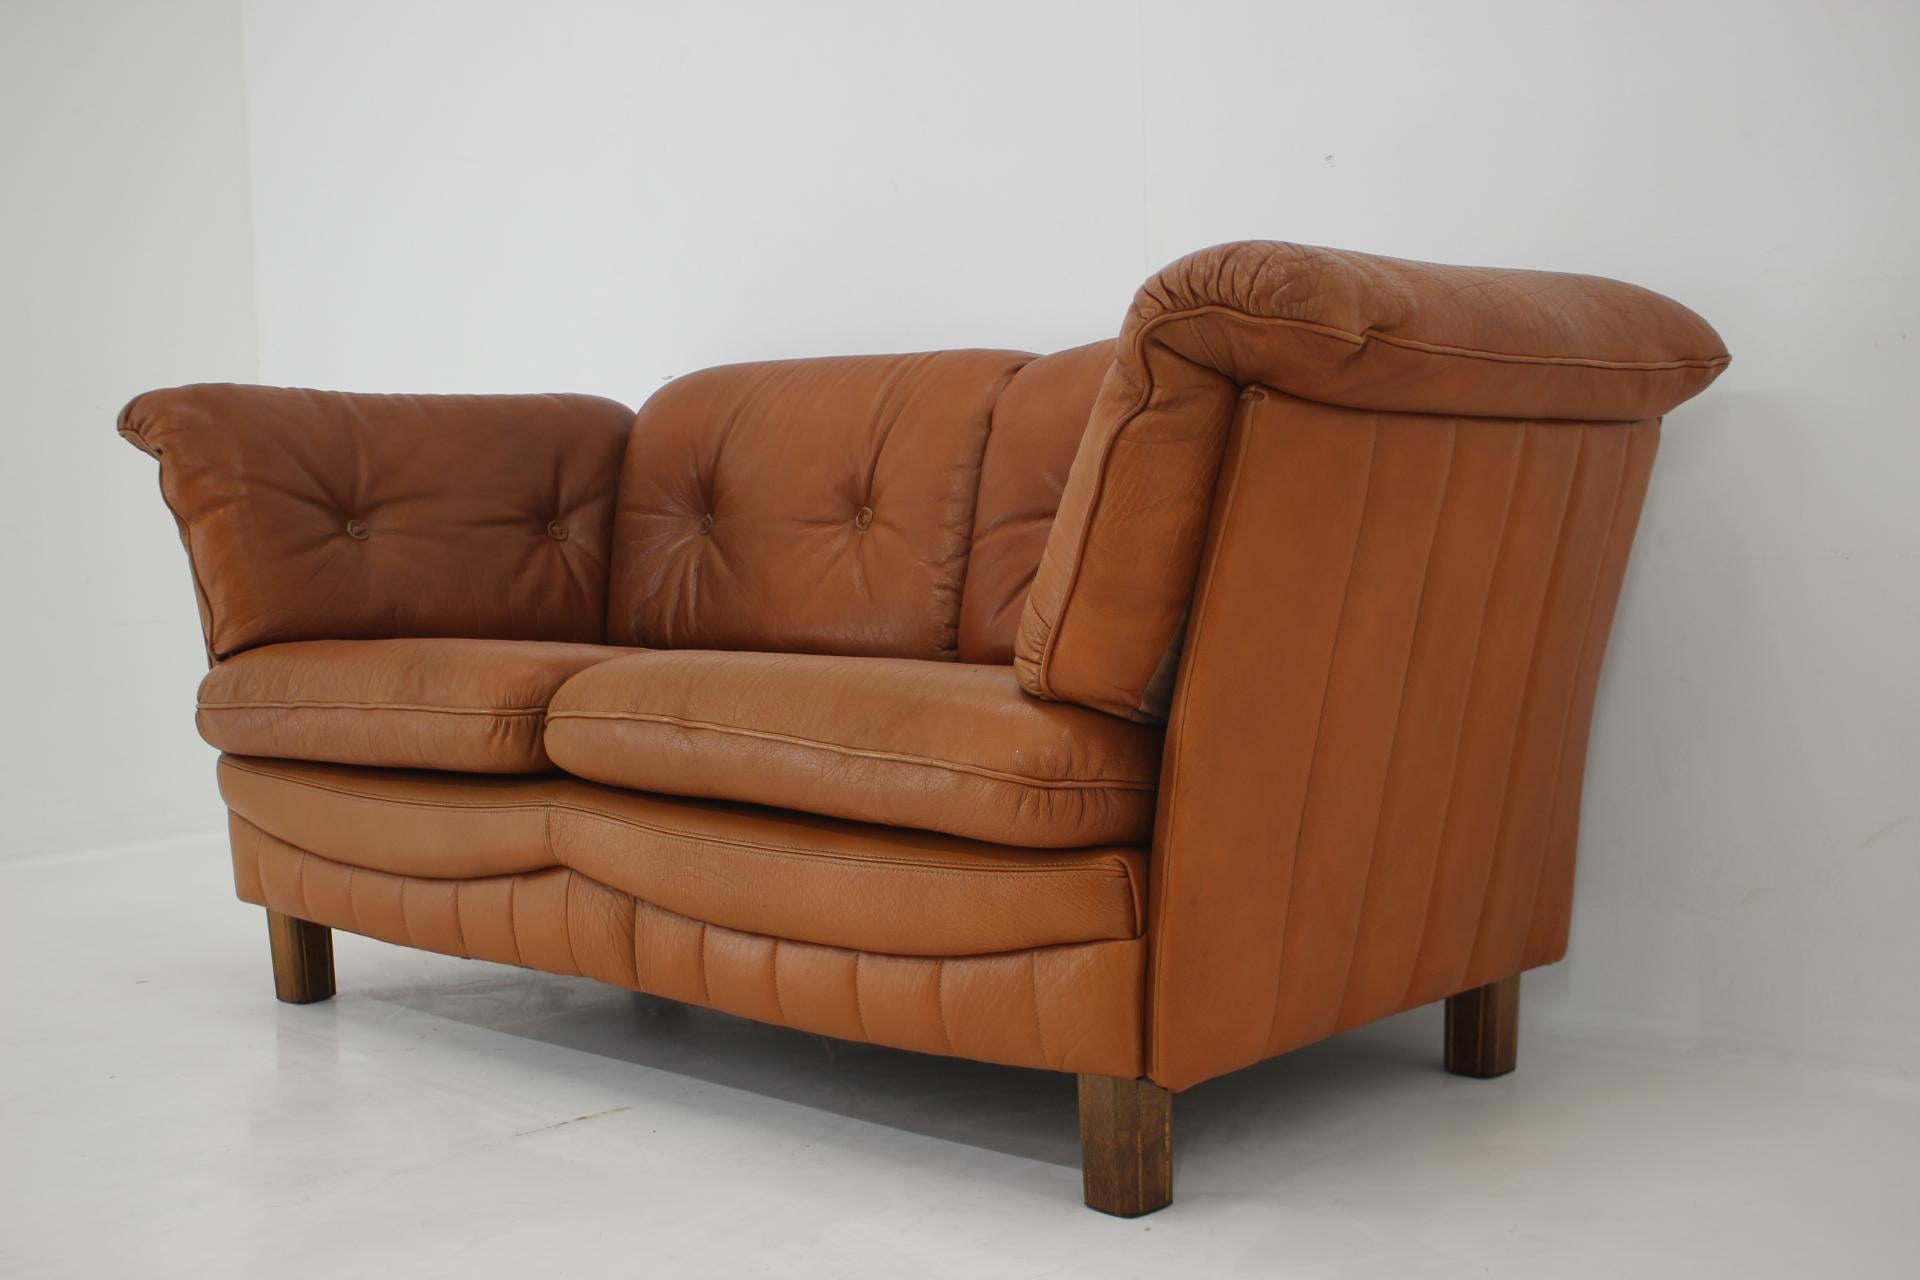 Late 20th Century 1970s Danish Cognac Leather 2 Seater Sofa For Sale